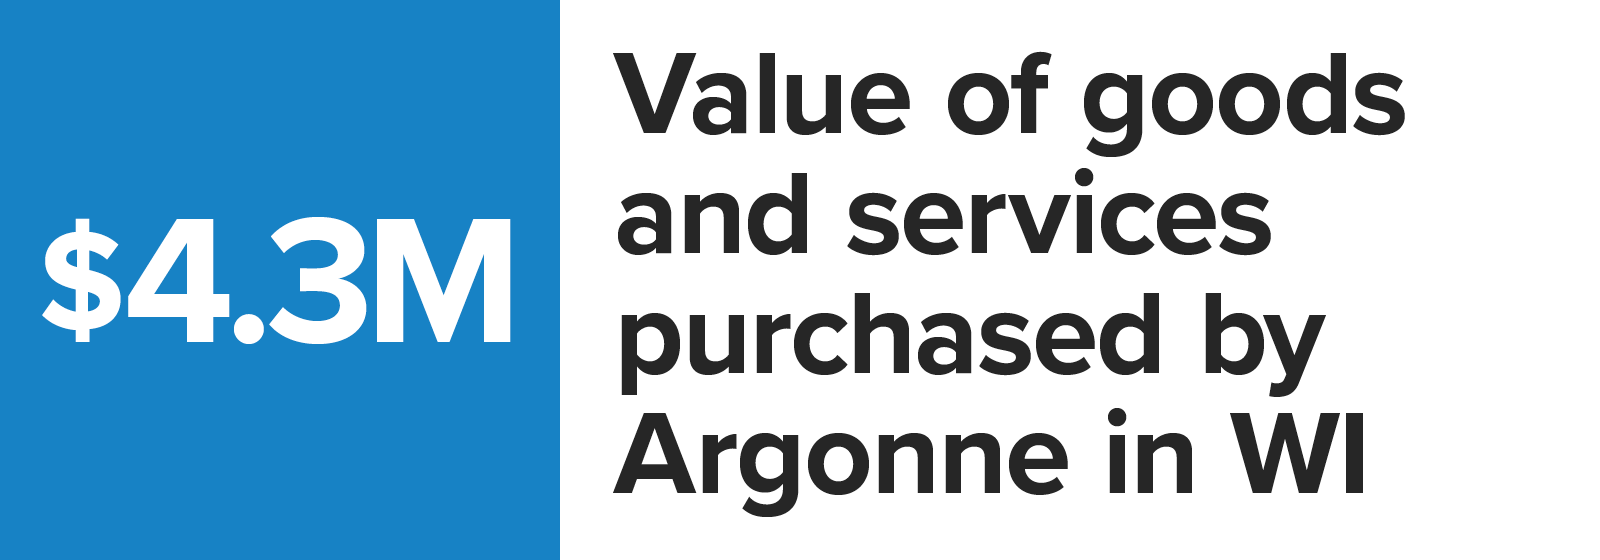 Number graphic value of goods and services purchased by Argonne in Wisconsin